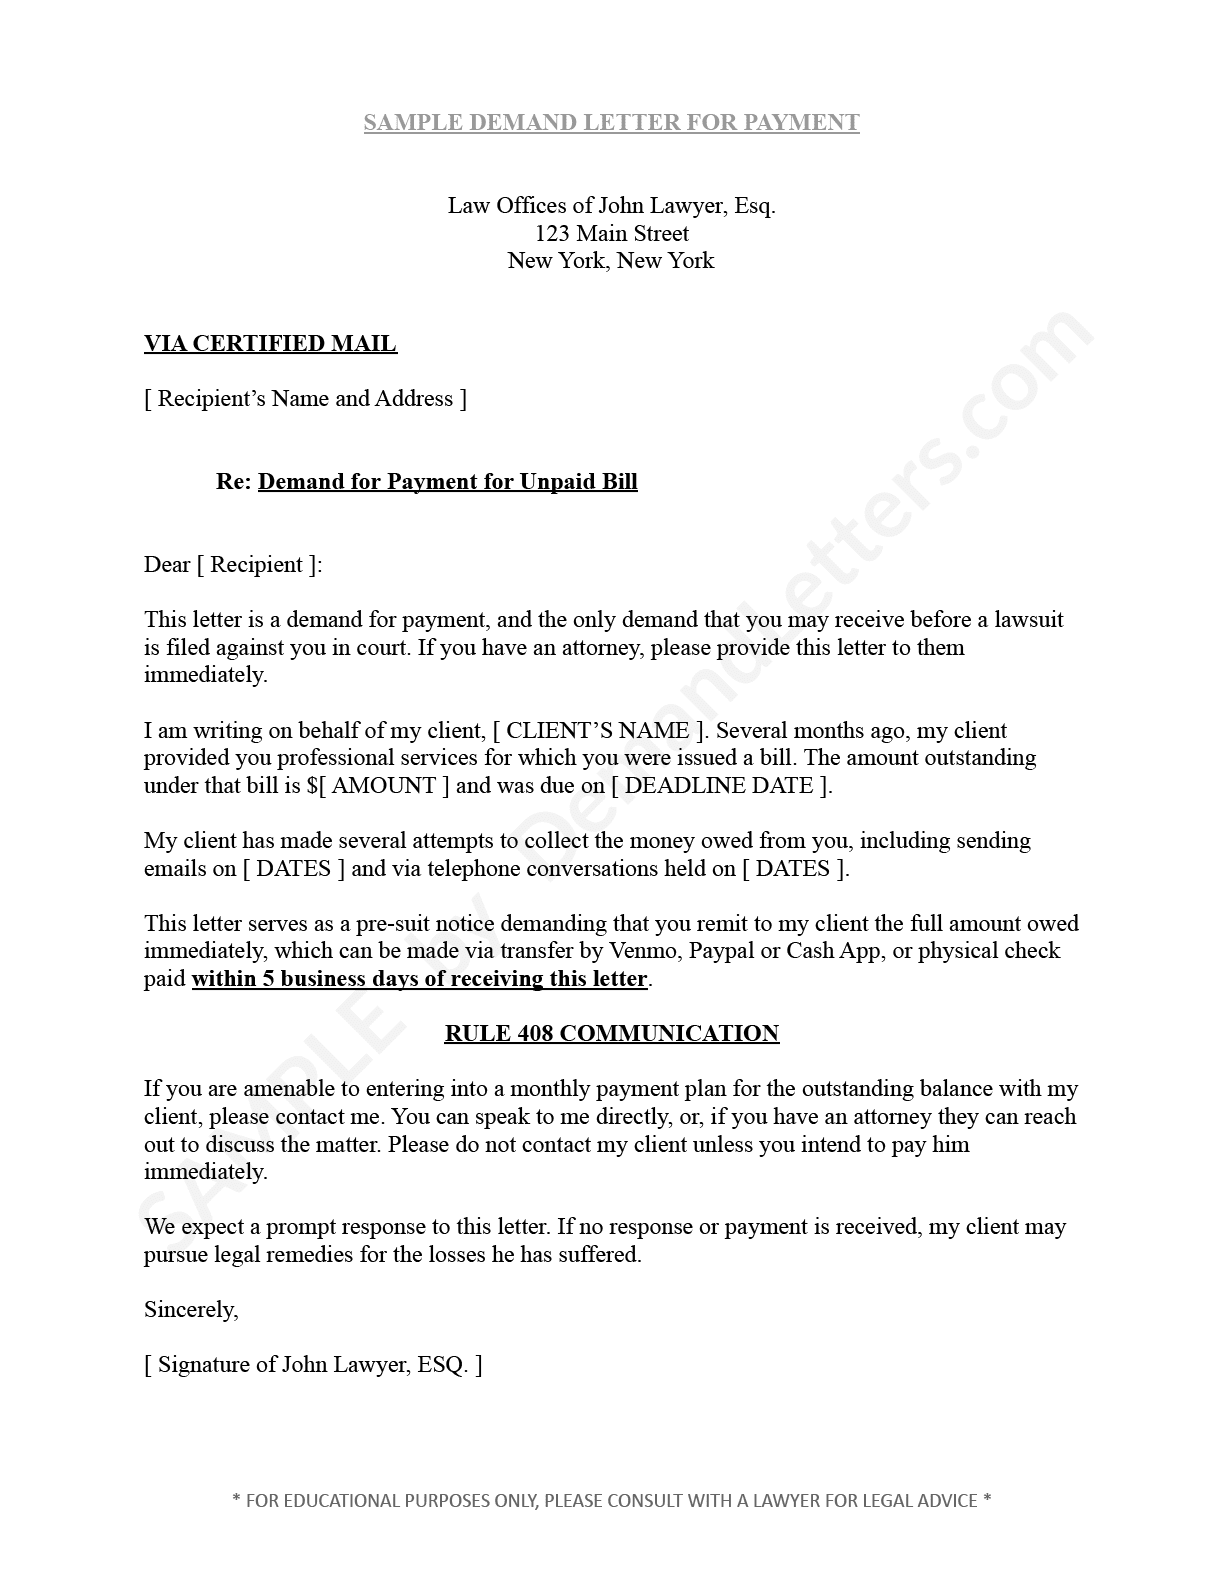 Sample Demand Letter For Payment By Lawyer- DemandLetters.com